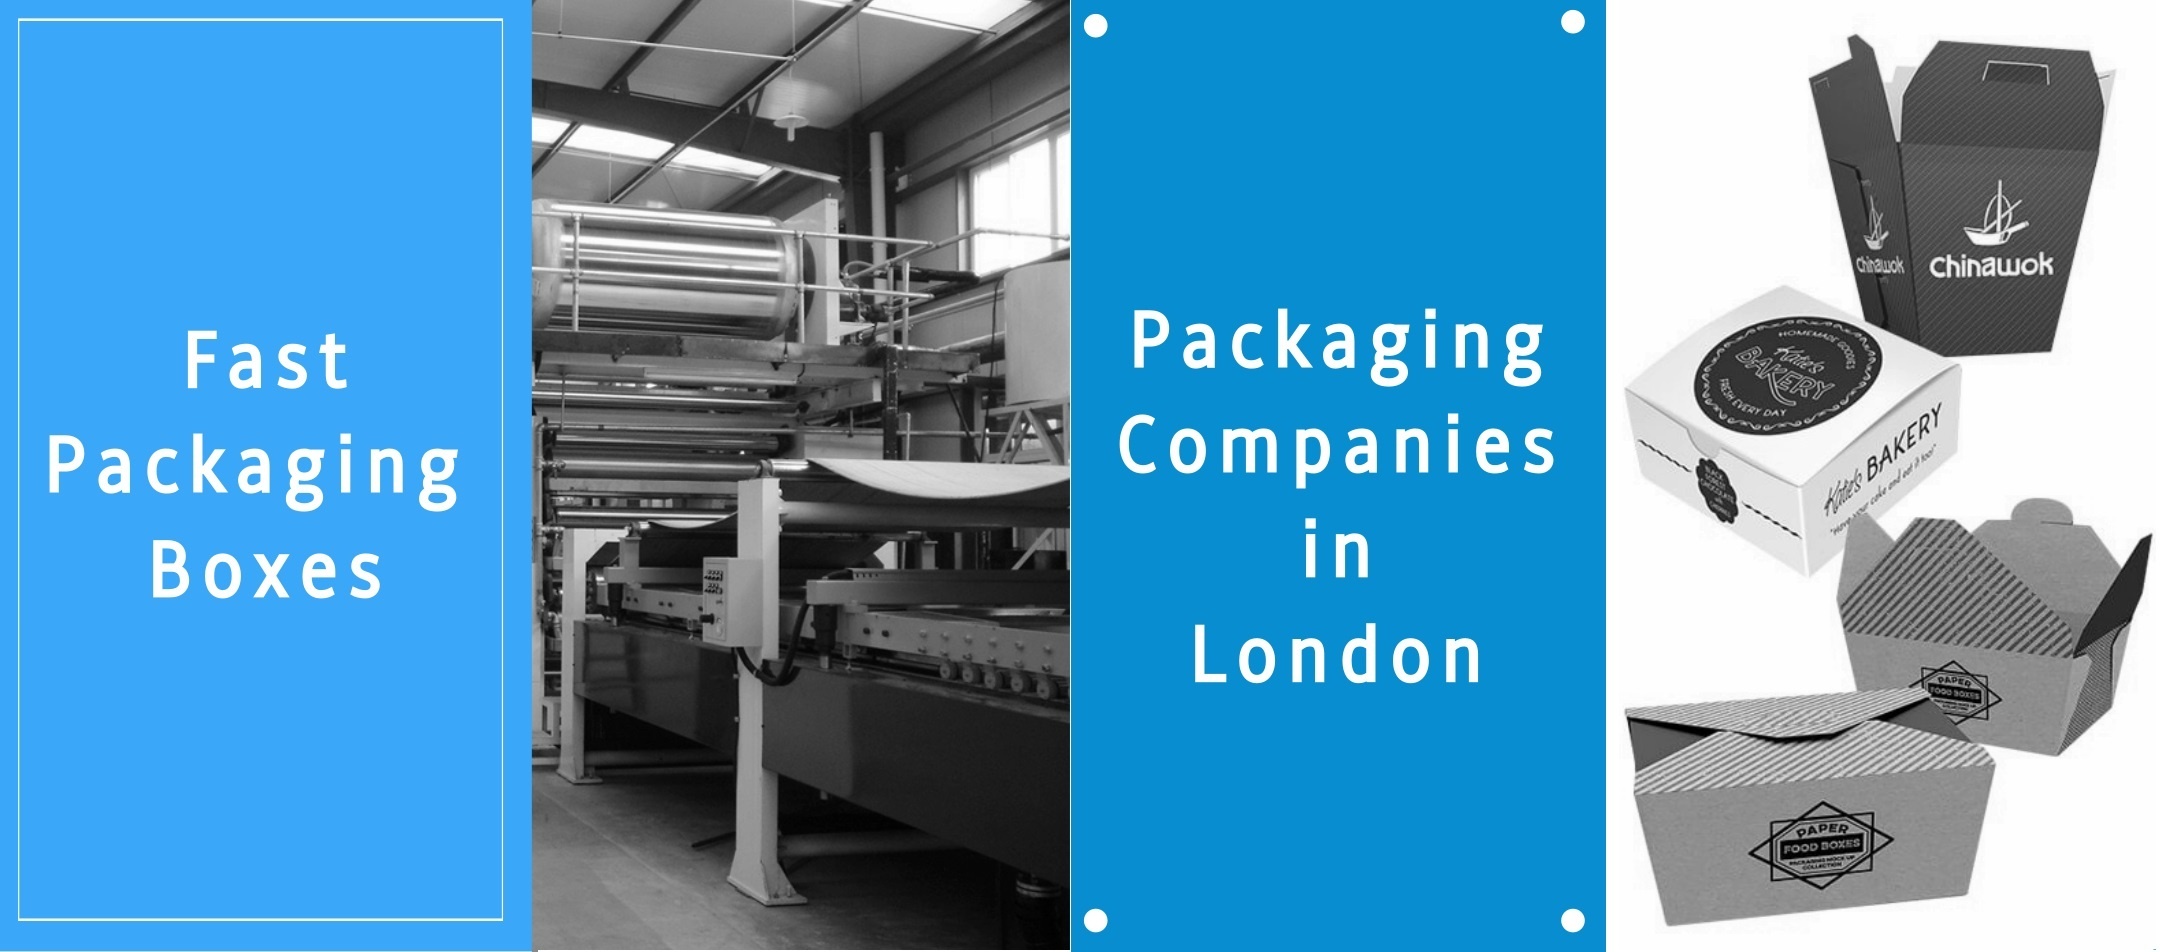 Image shows Packaging companies in London production machine and press.